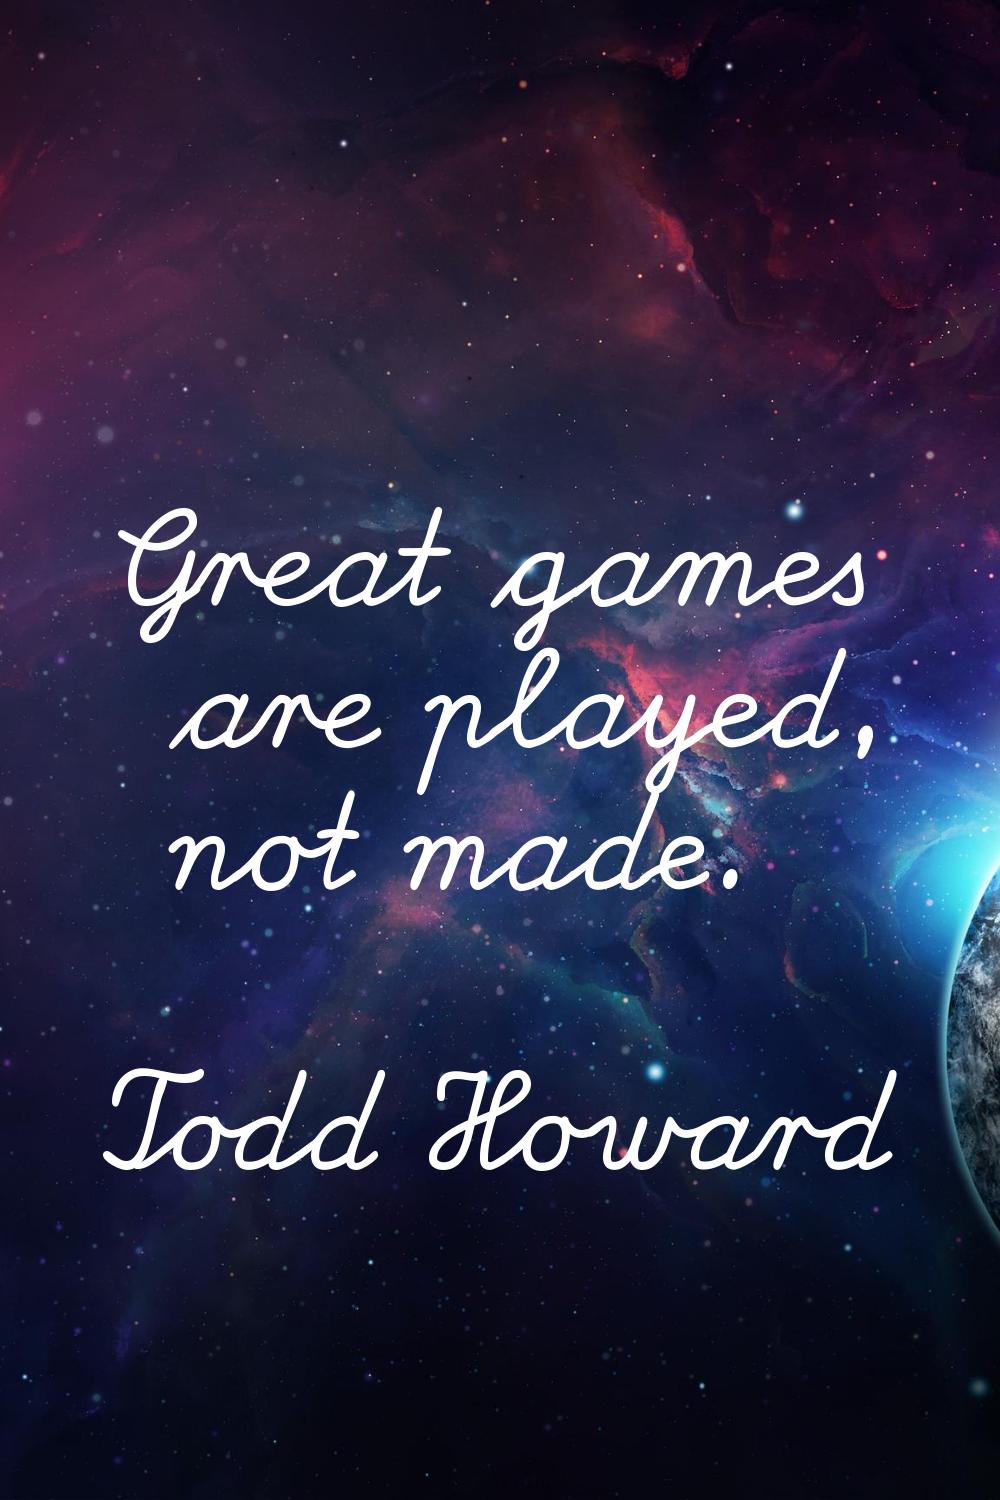 Great games are played, not made.